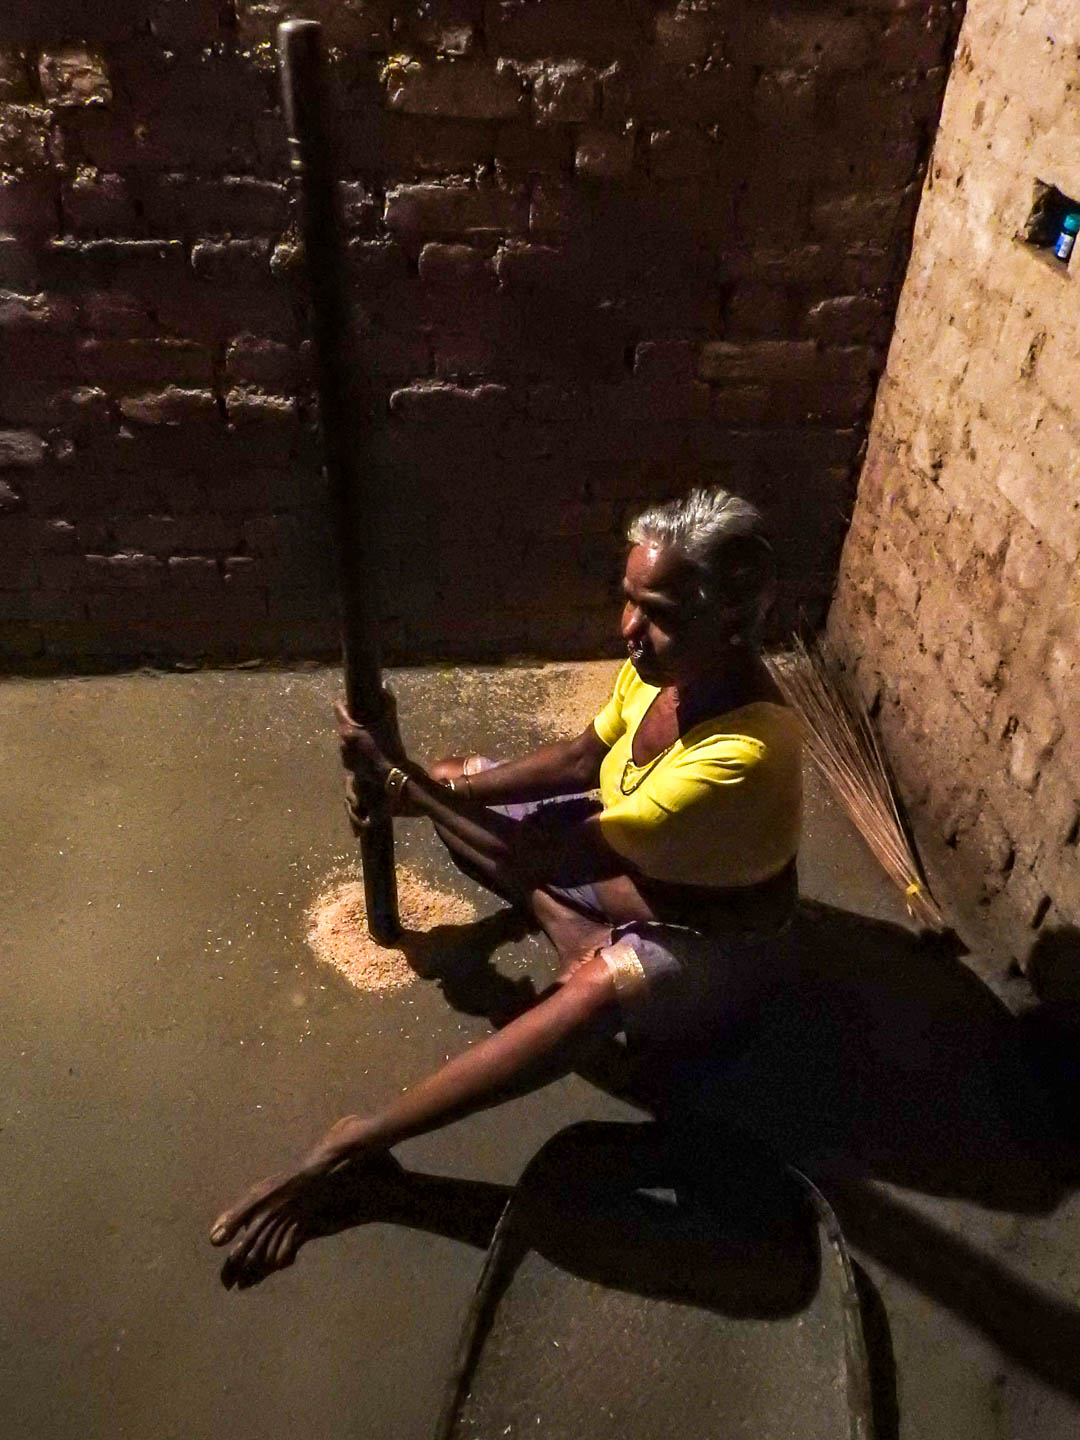 Locals have dedicated rooms for pounding rice, such as demonstrated by this villager. Photo by Elita Almeida.Locals have dedicated rooms for pounding rice, such as demonstrated by this villager. Photo by Elita Almeida.